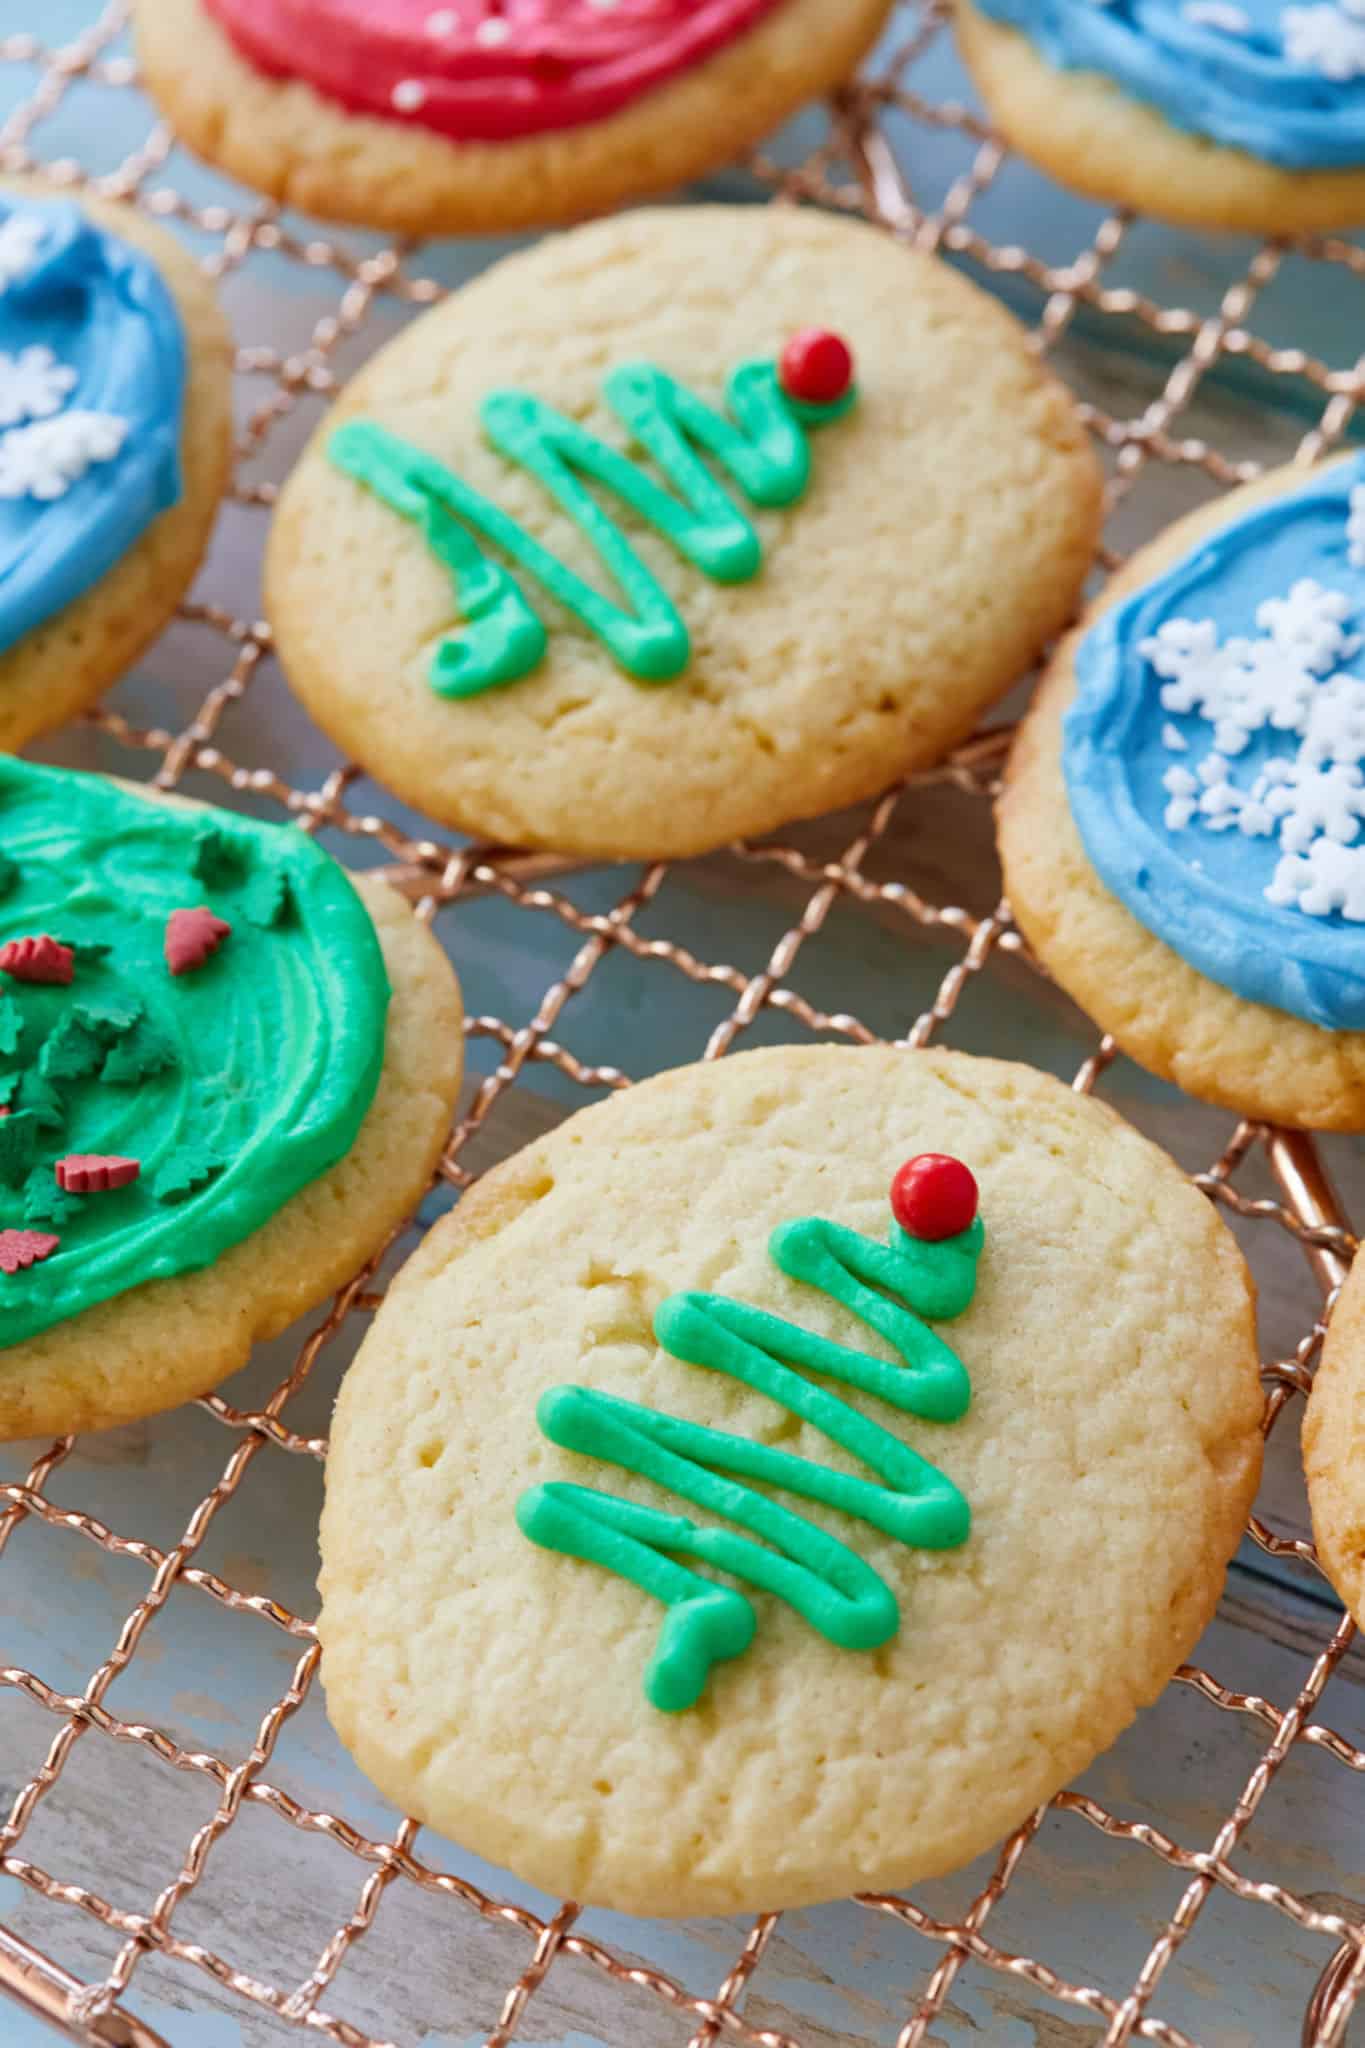 A close up of christmas tree decorations on my soft sugar cookies recipe.